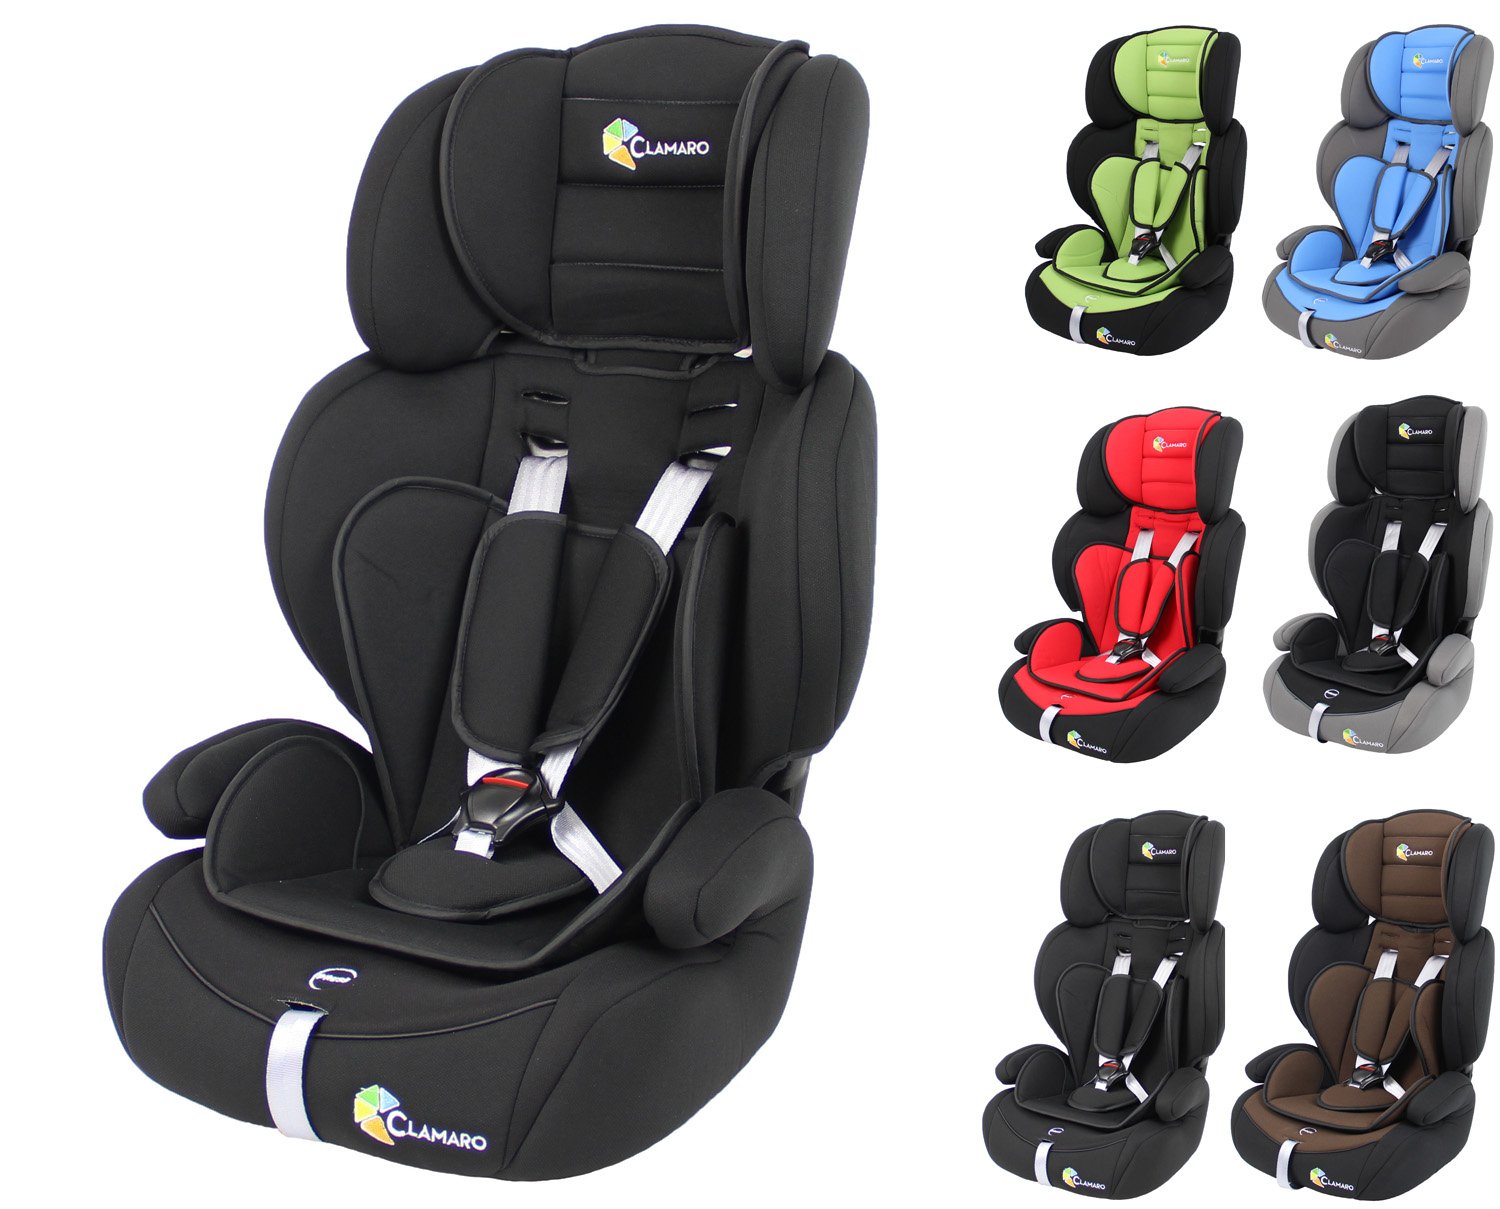 Clamaro Guardian Child Car Seat 9-36 kg Growing with Child Car Seat for Children from 1-12 Years Group 1/2/3 ECE R44/04 Black